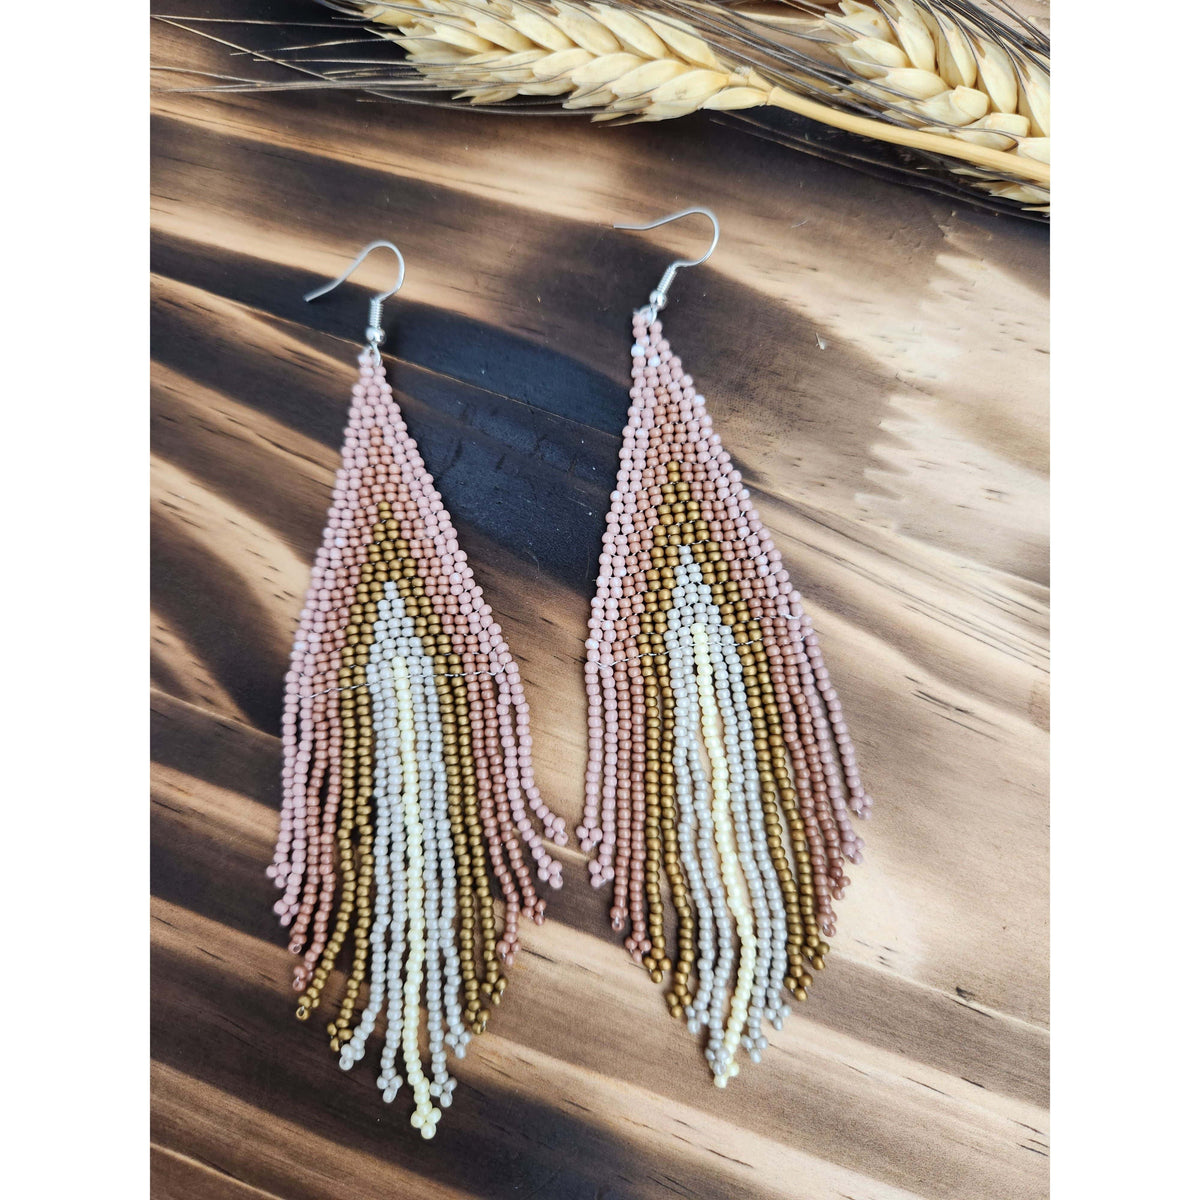 Natural Vibes Beaded Fringe Earrings Earrings TheFringeCultureCollective